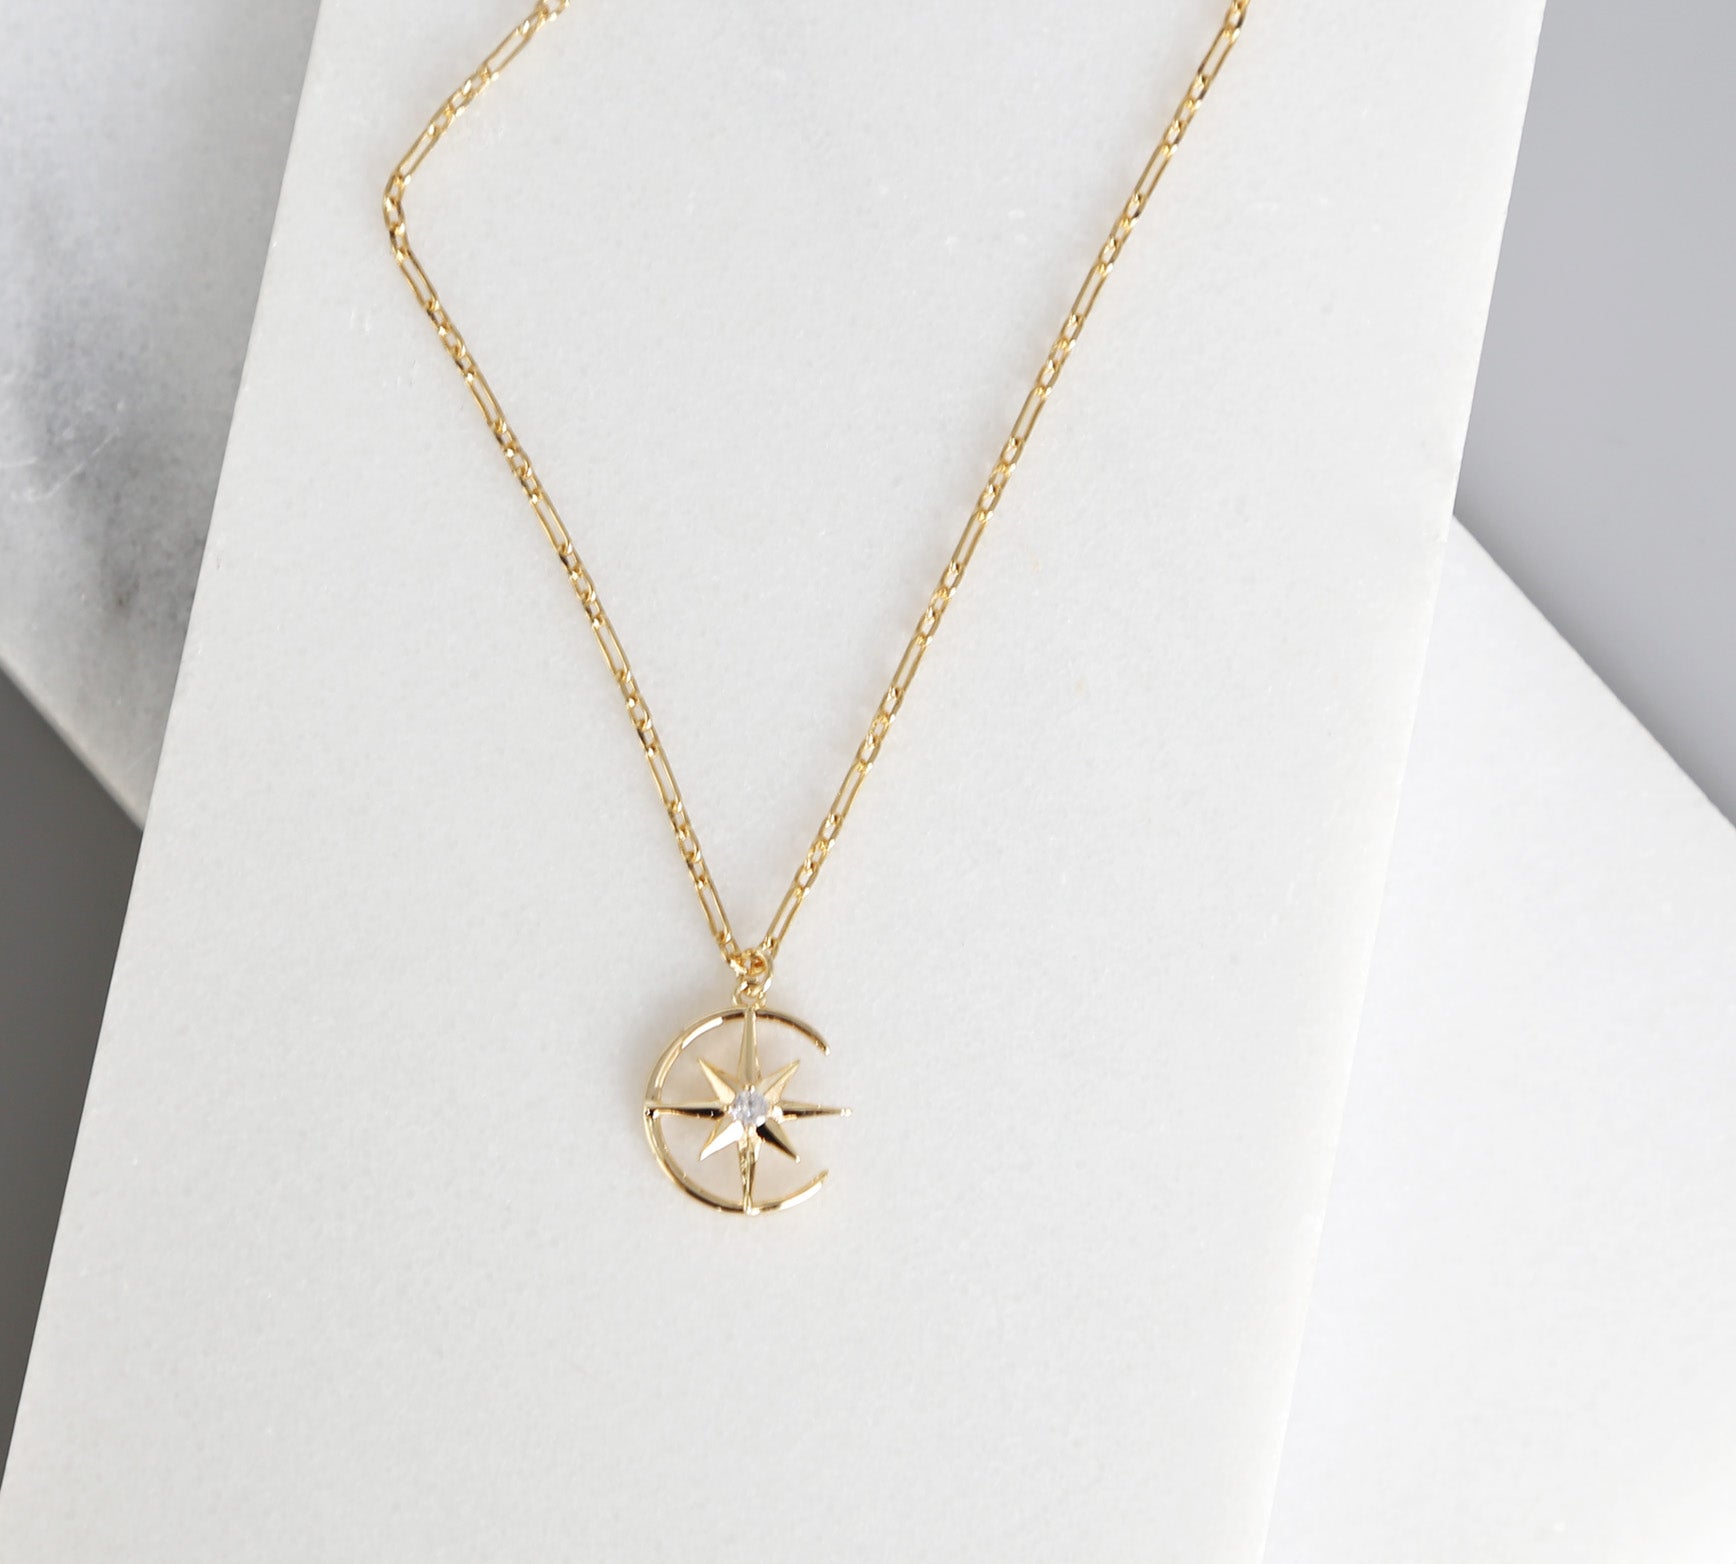 Crescent Moon Necklace, Gold Necklace, Dainty Gold Jewelry, Celestial, Gold Chain, Luminous Collection